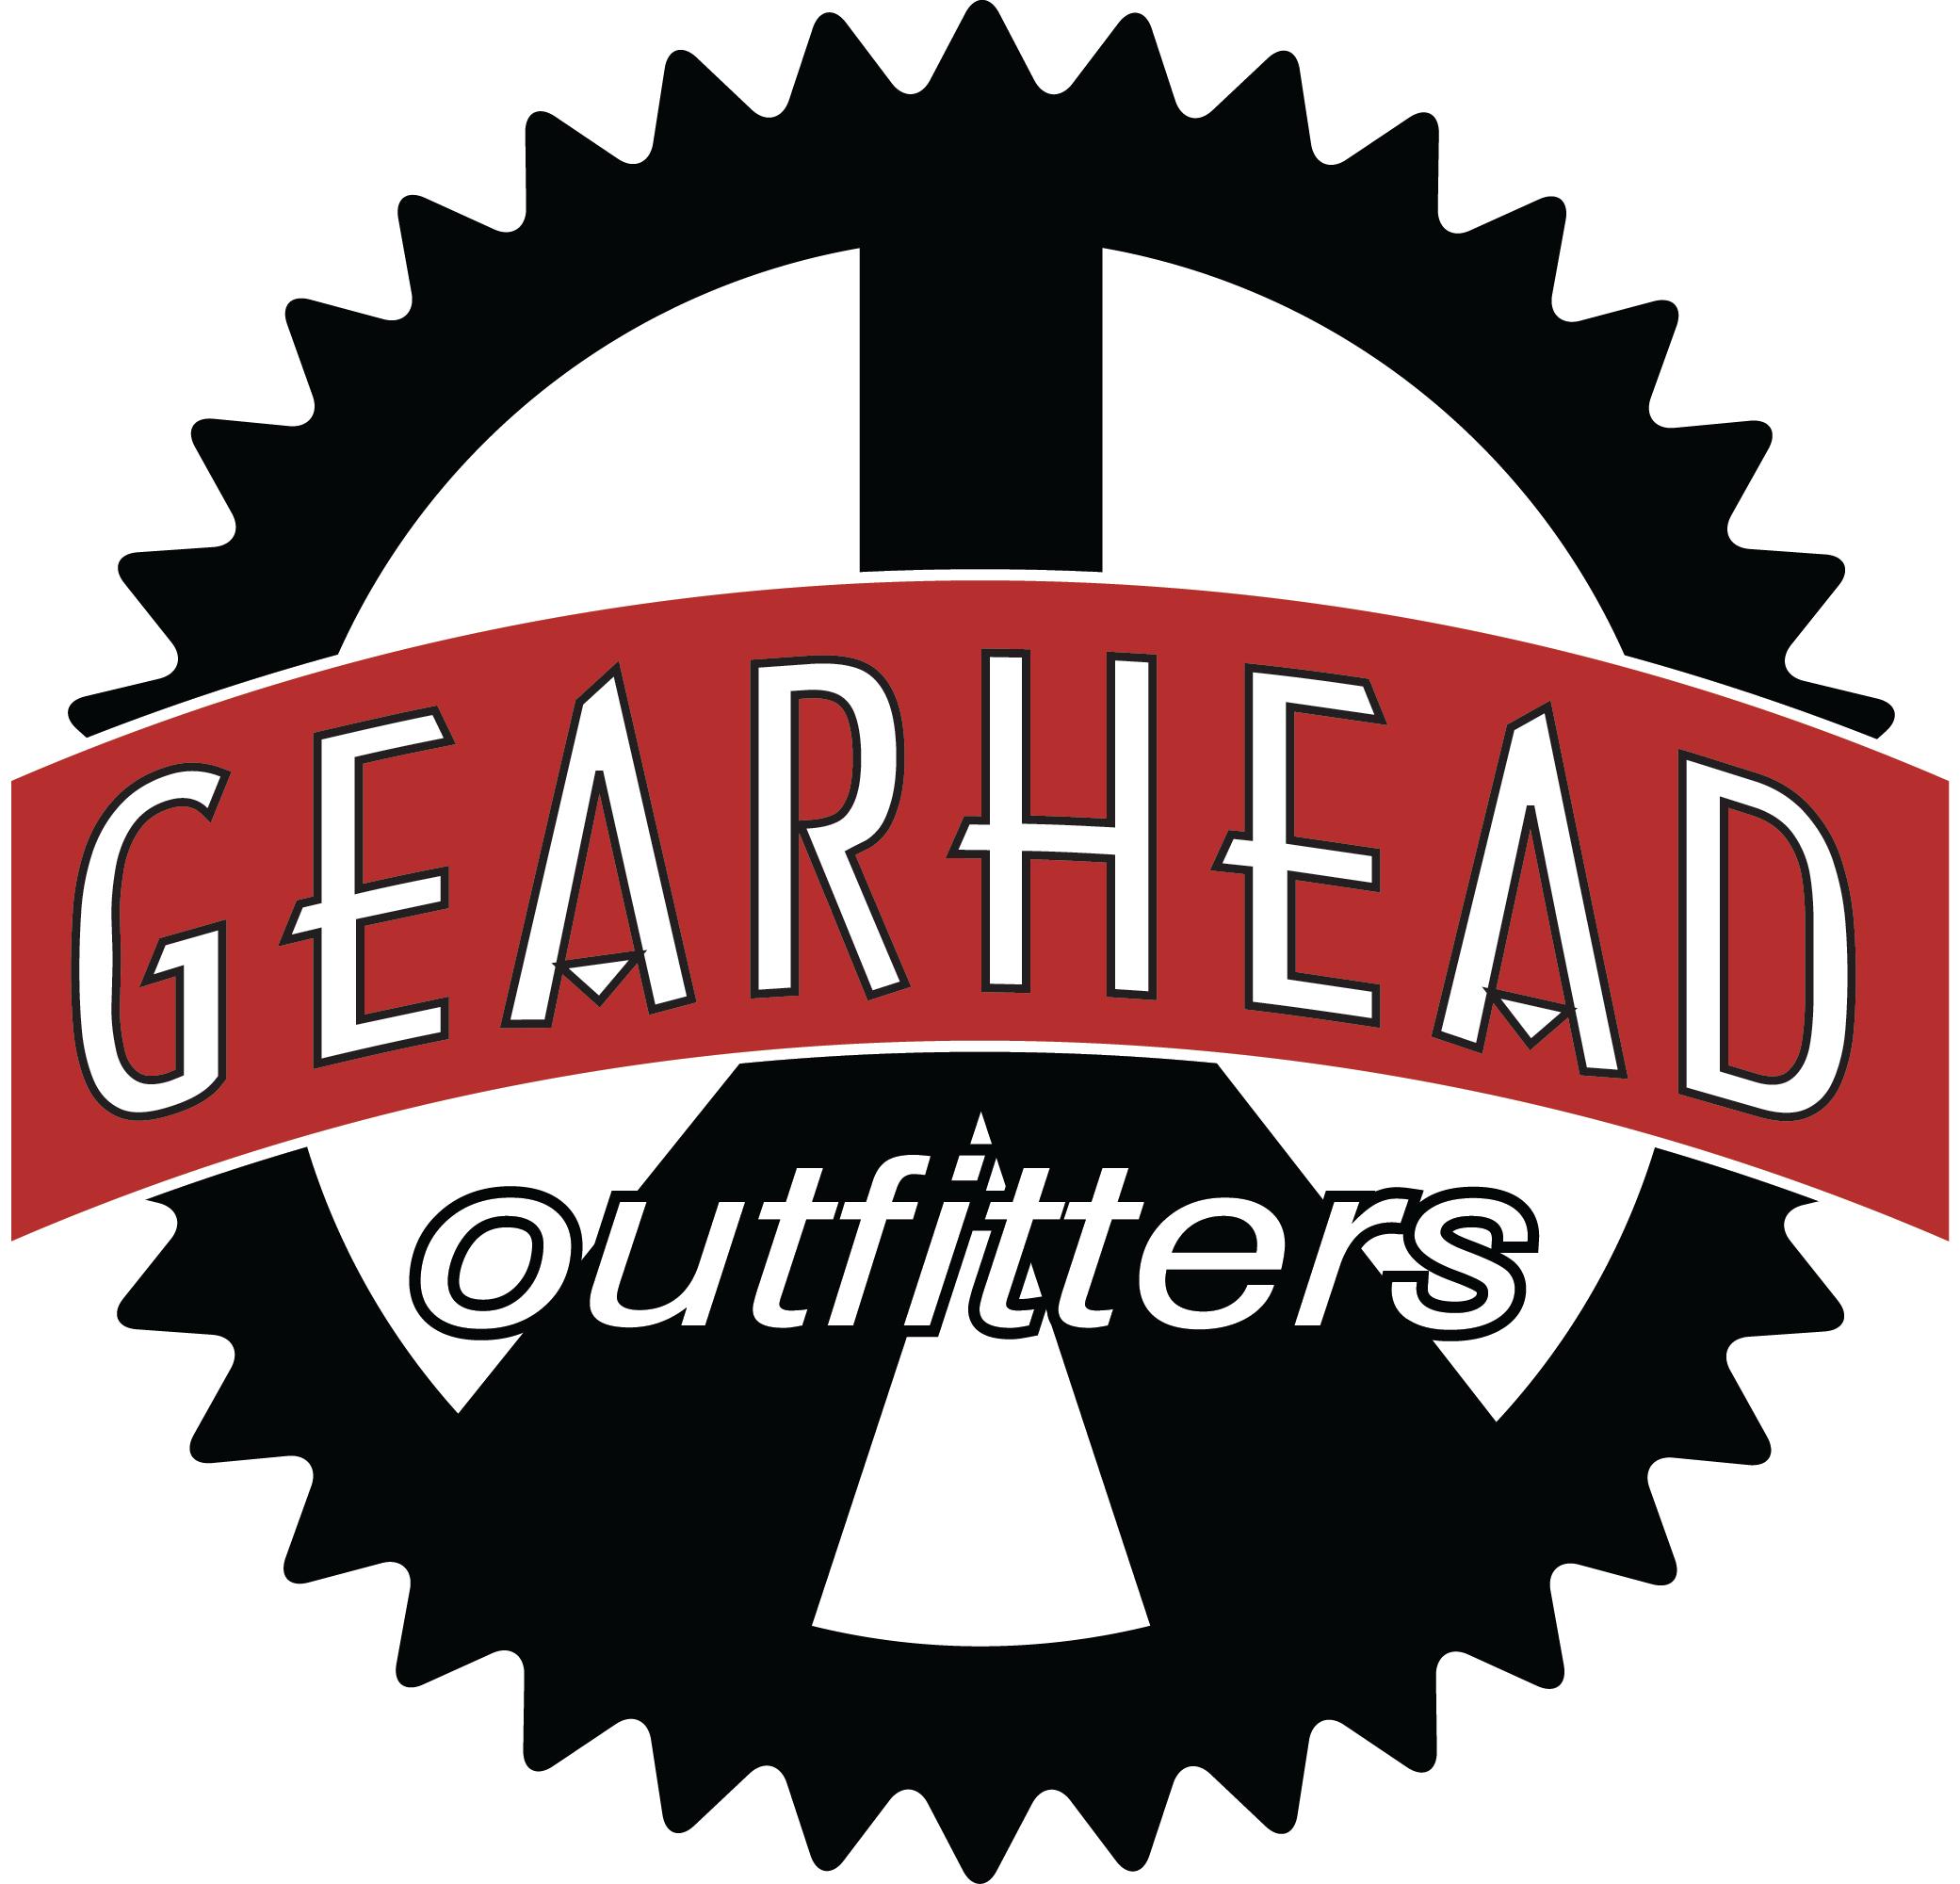 Gearhead Outfitters - Gearhead Outfitters (2081x2000)